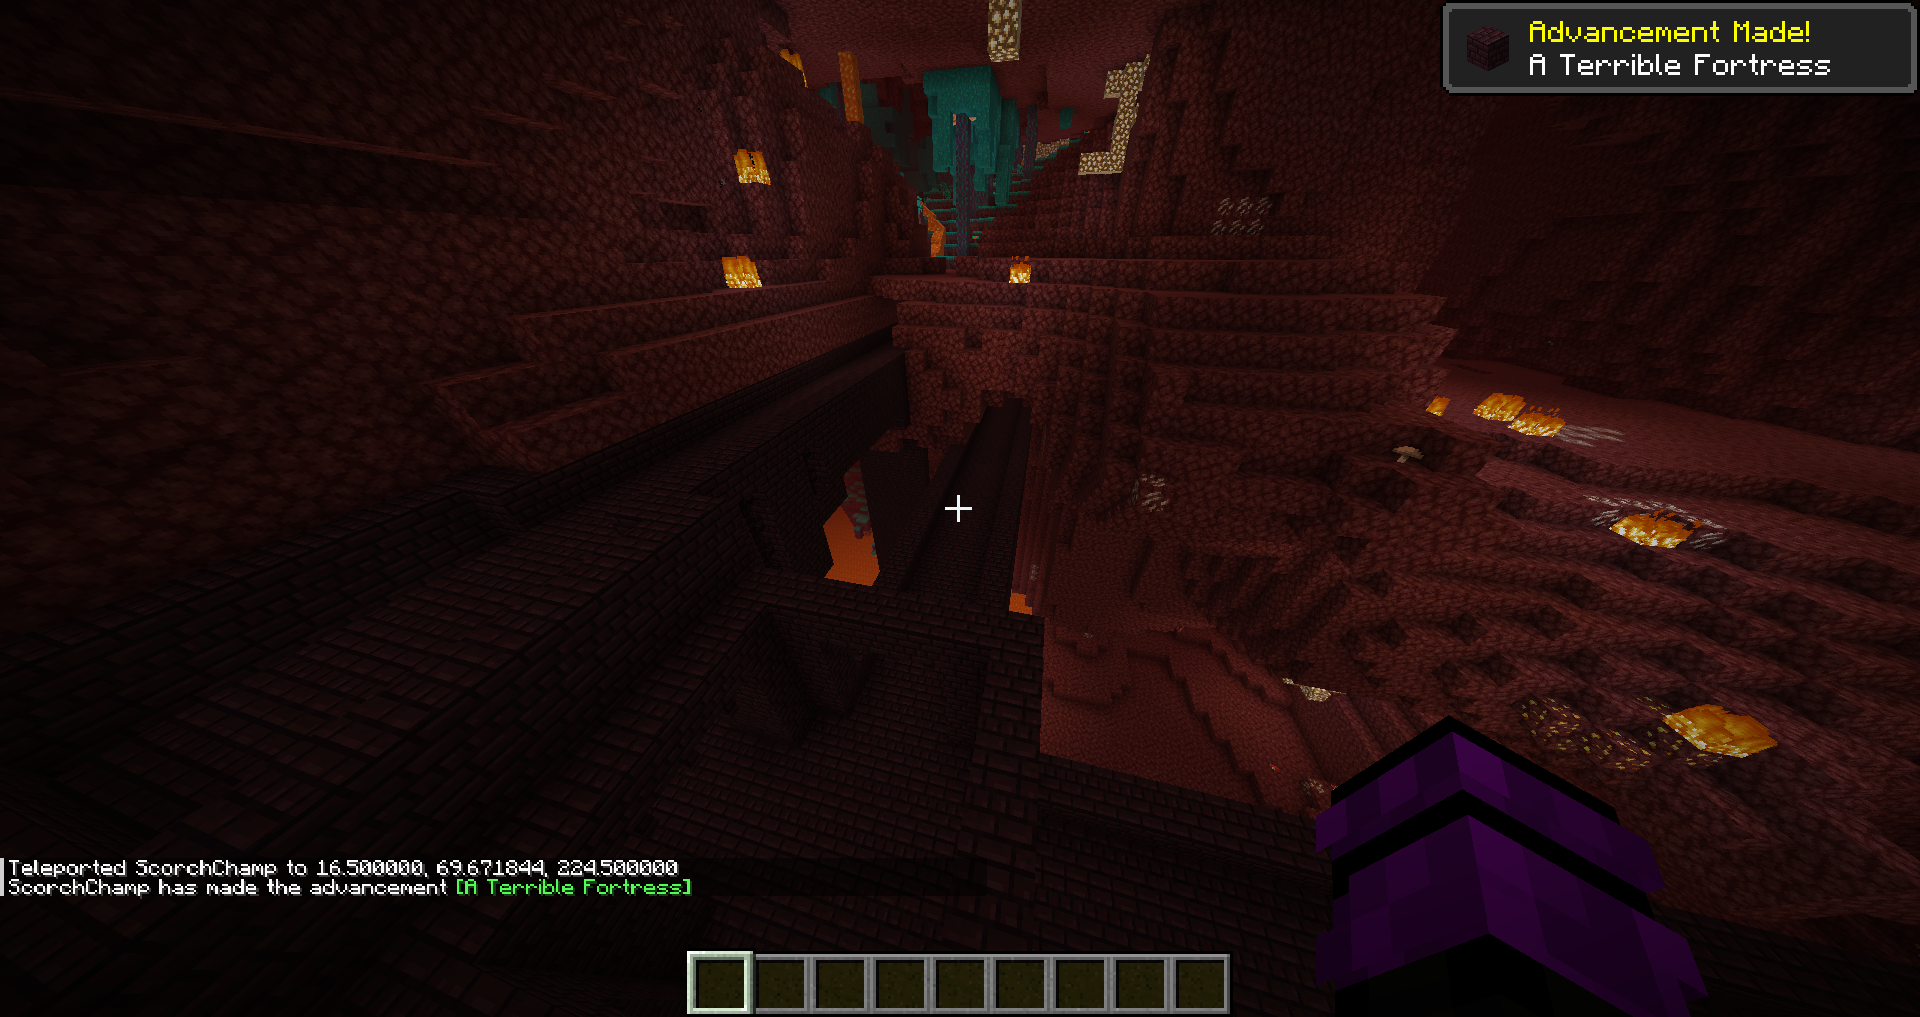 Nether locations